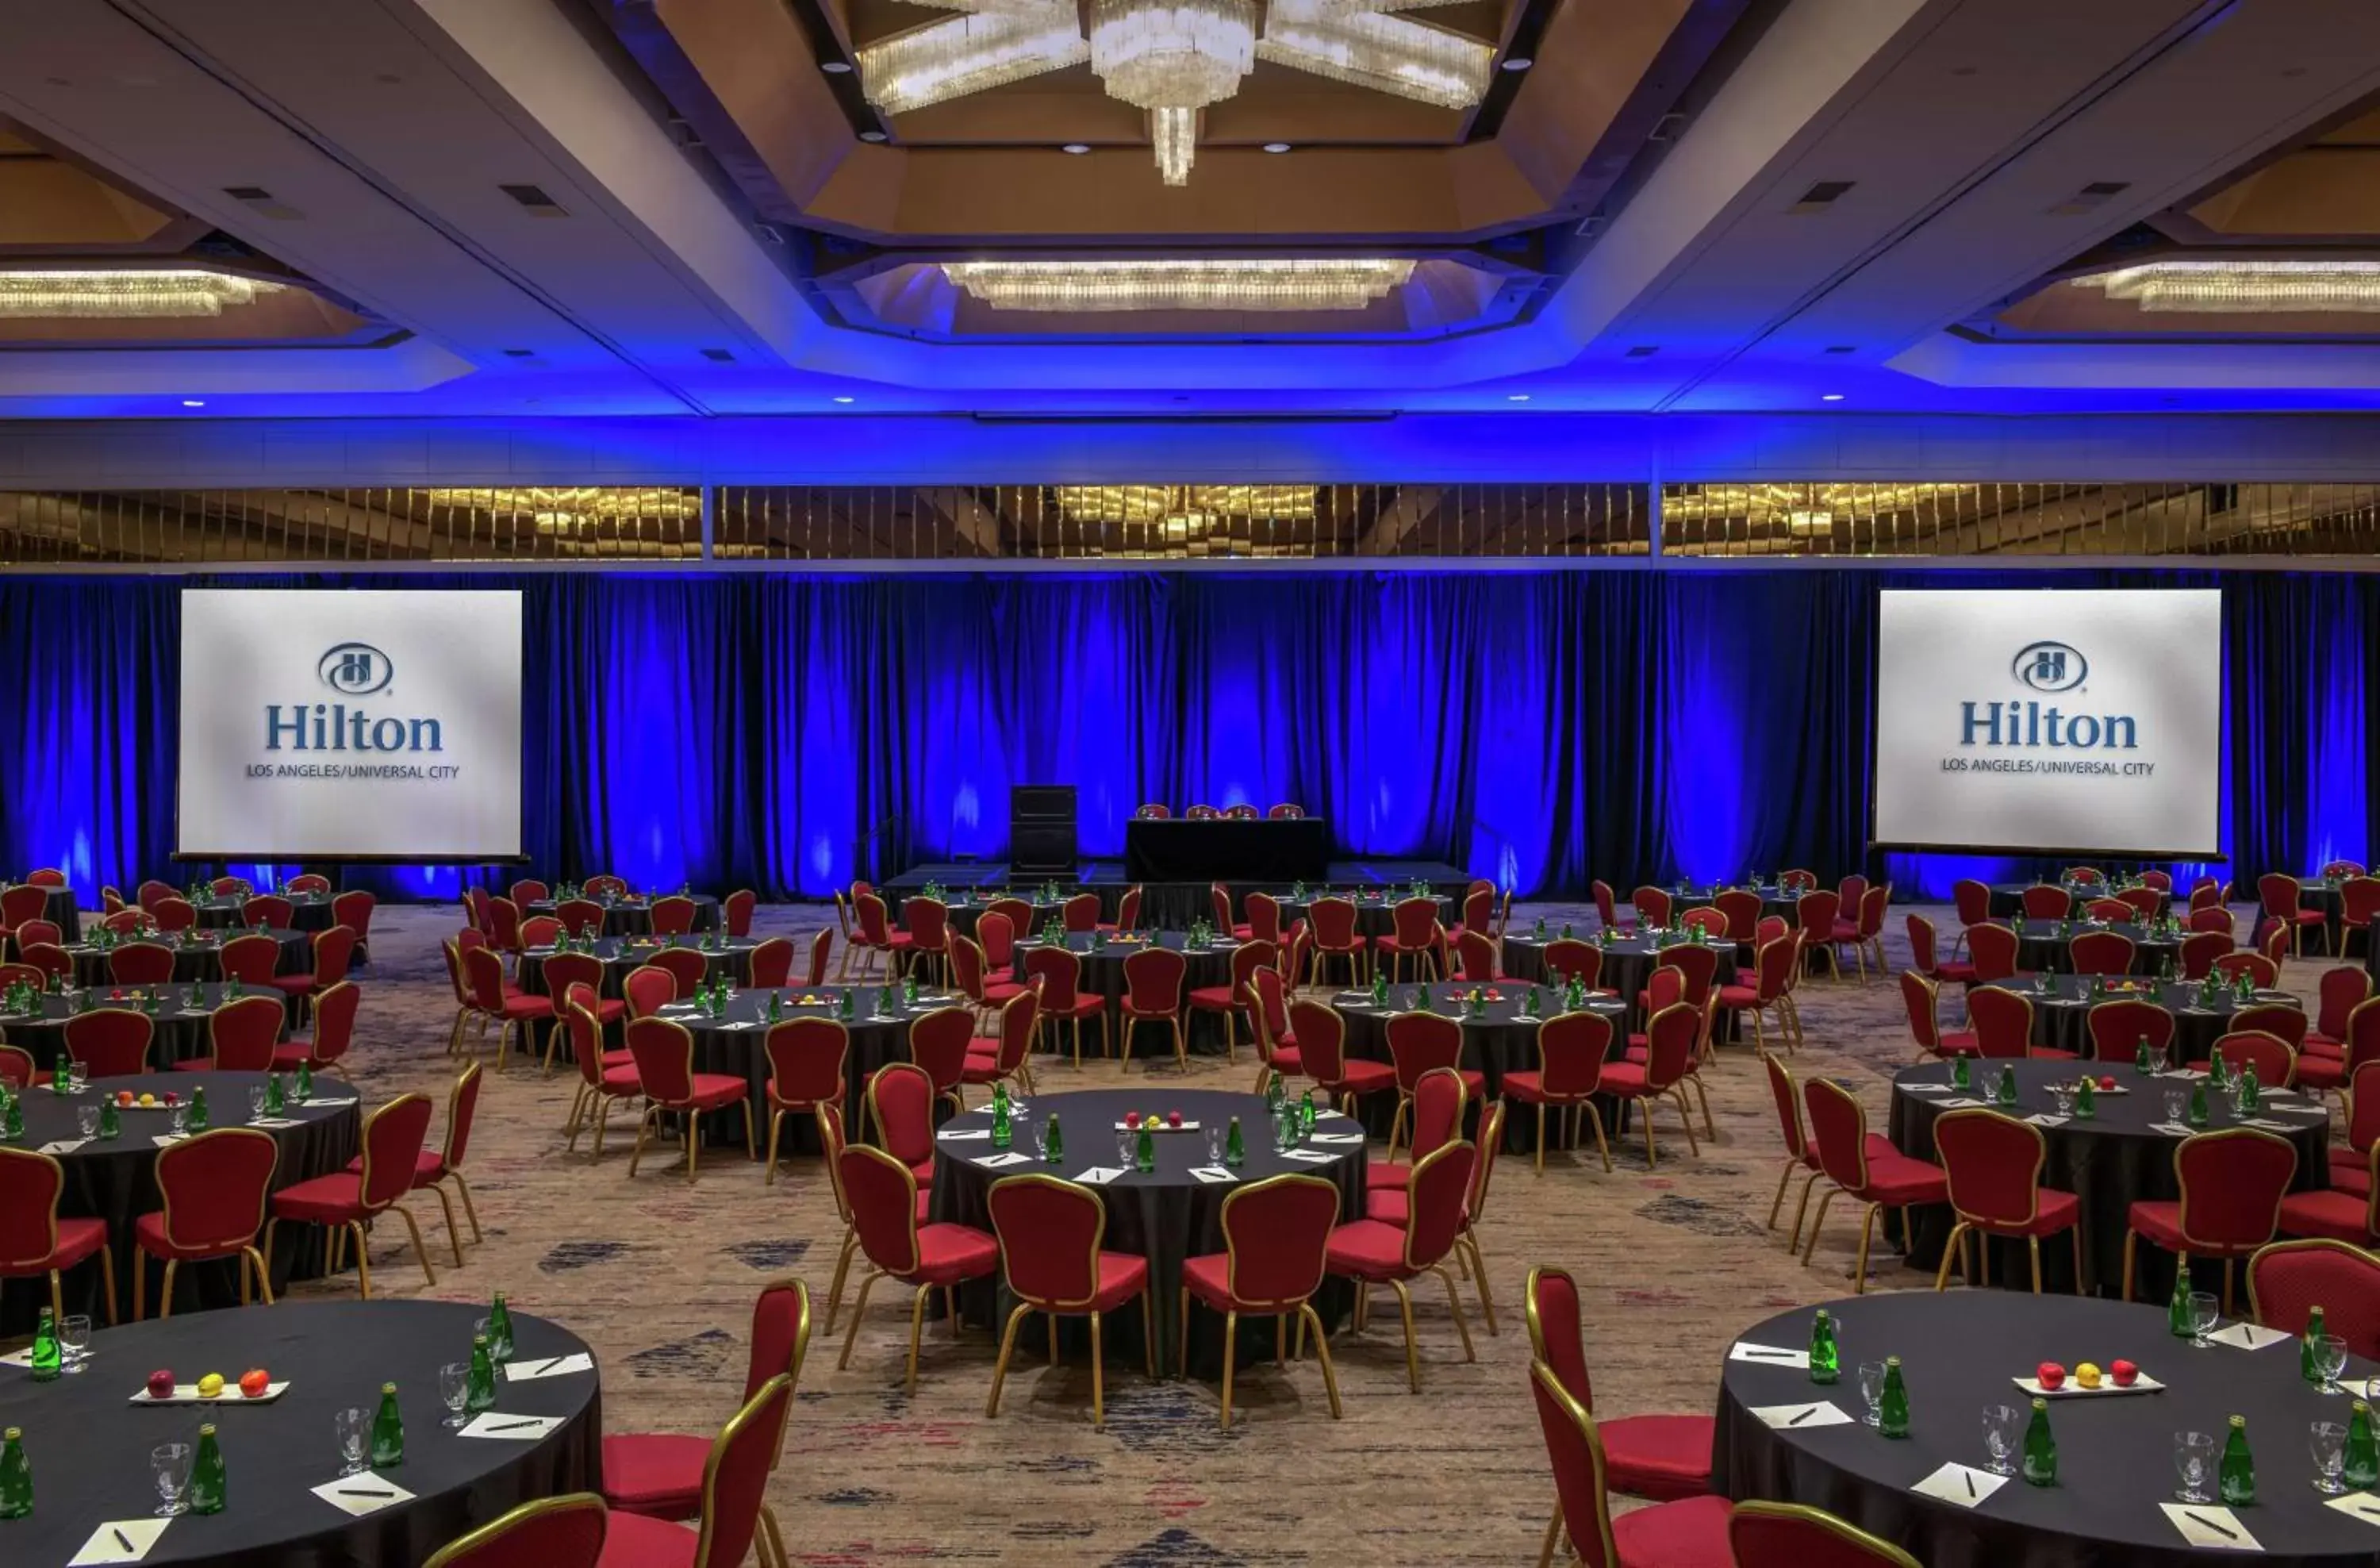 Meeting/conference room in Hilton Los Angeles-Universal City